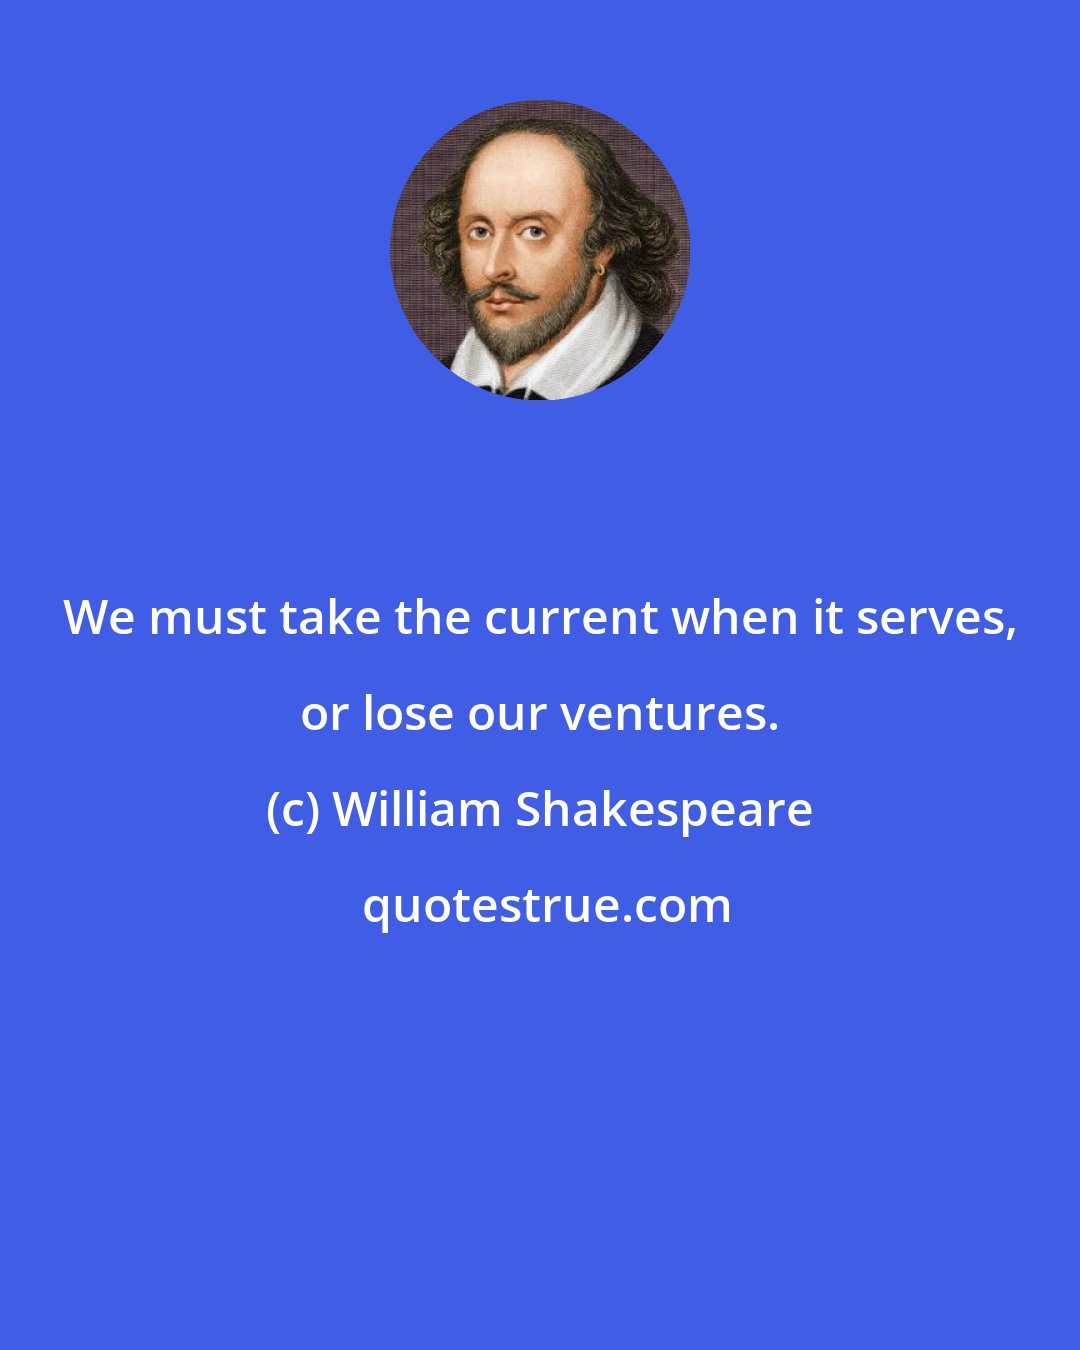 William Shakespeare: We must take the current when it serves, or lose our ventures.